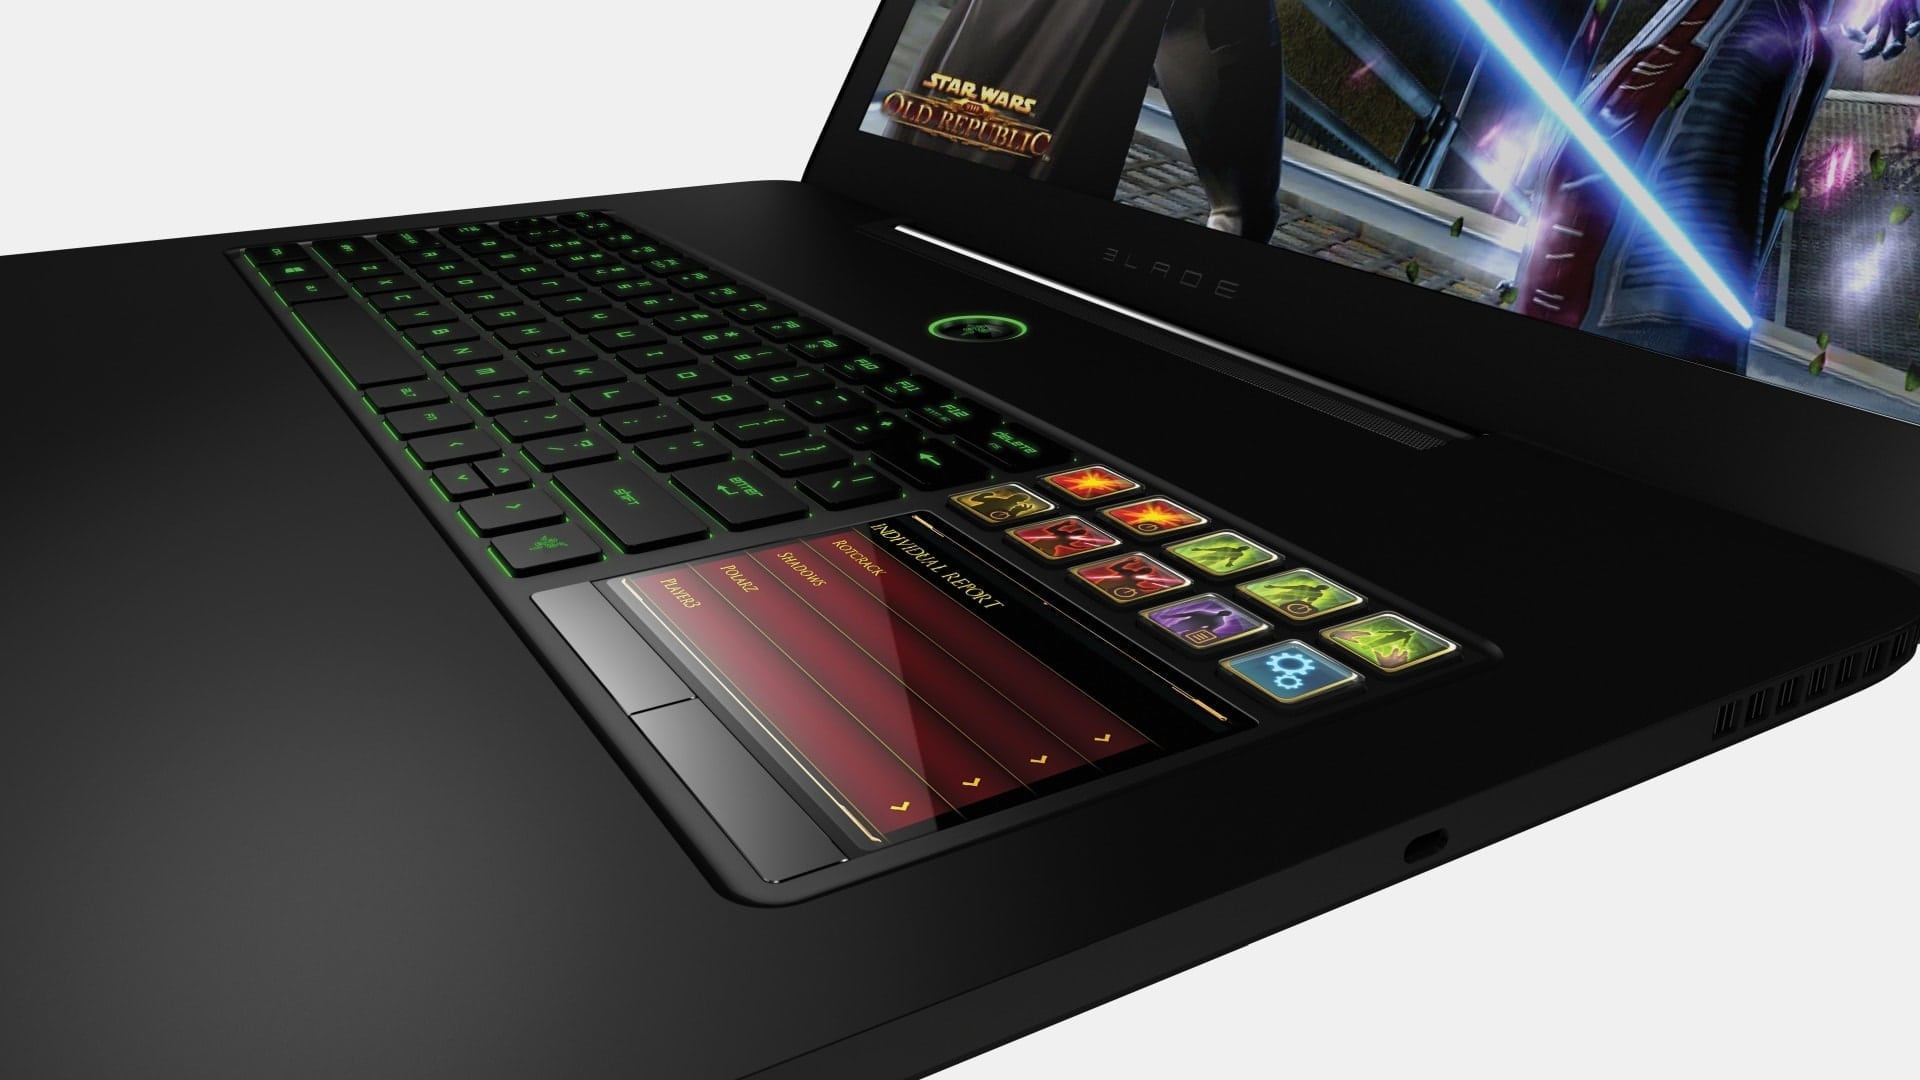 3 best gaming laptops under 800 dollars in 2017 \u22c6 Android Tipster